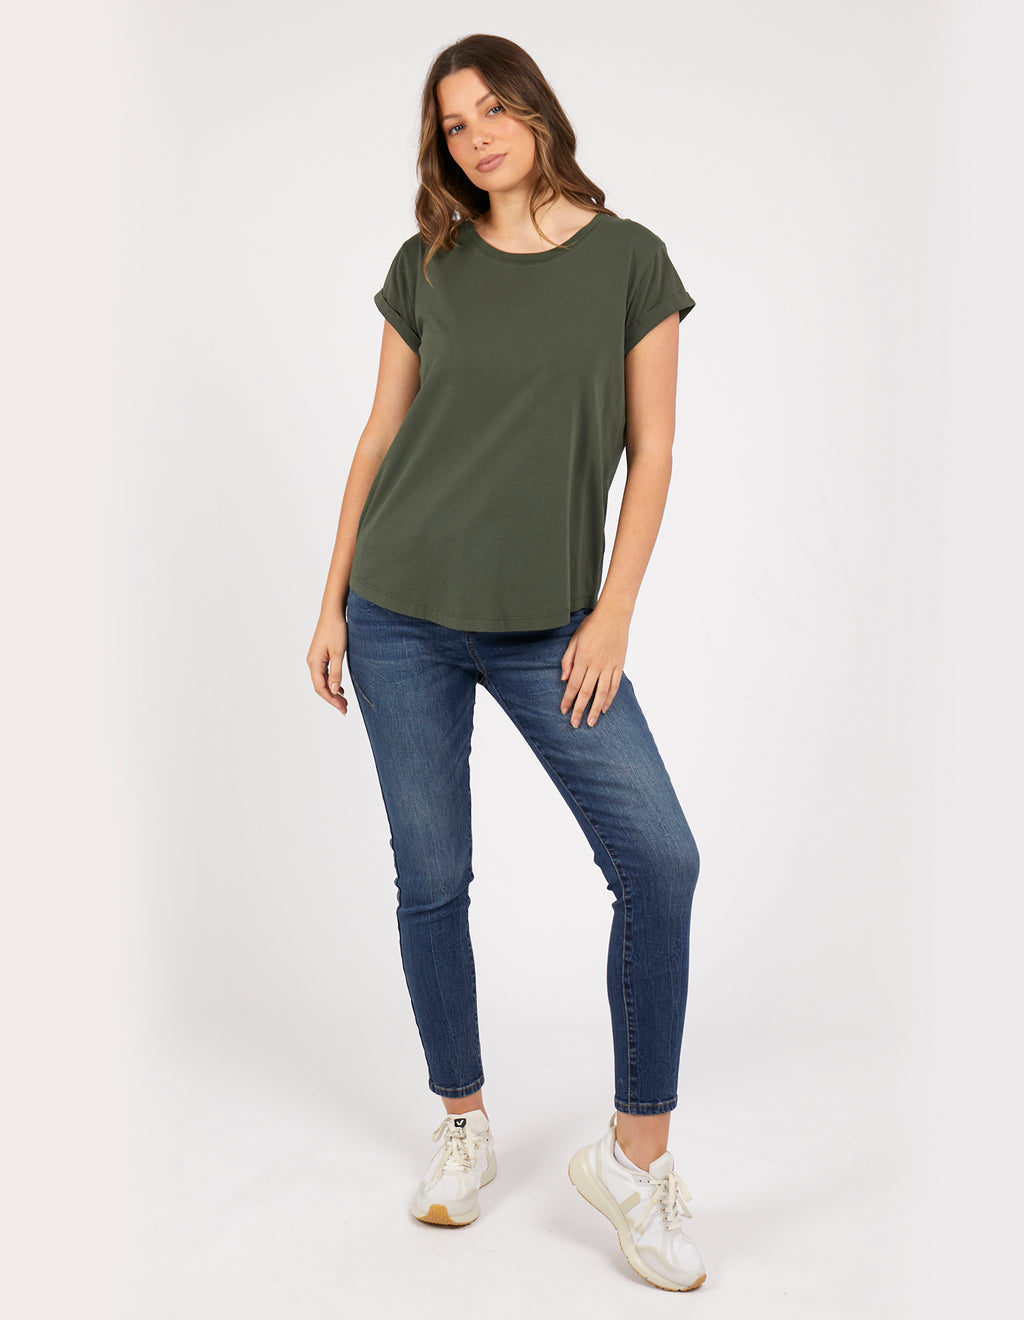 manly tee by foxwood is a soft cotton rolled sleeve top in khaki